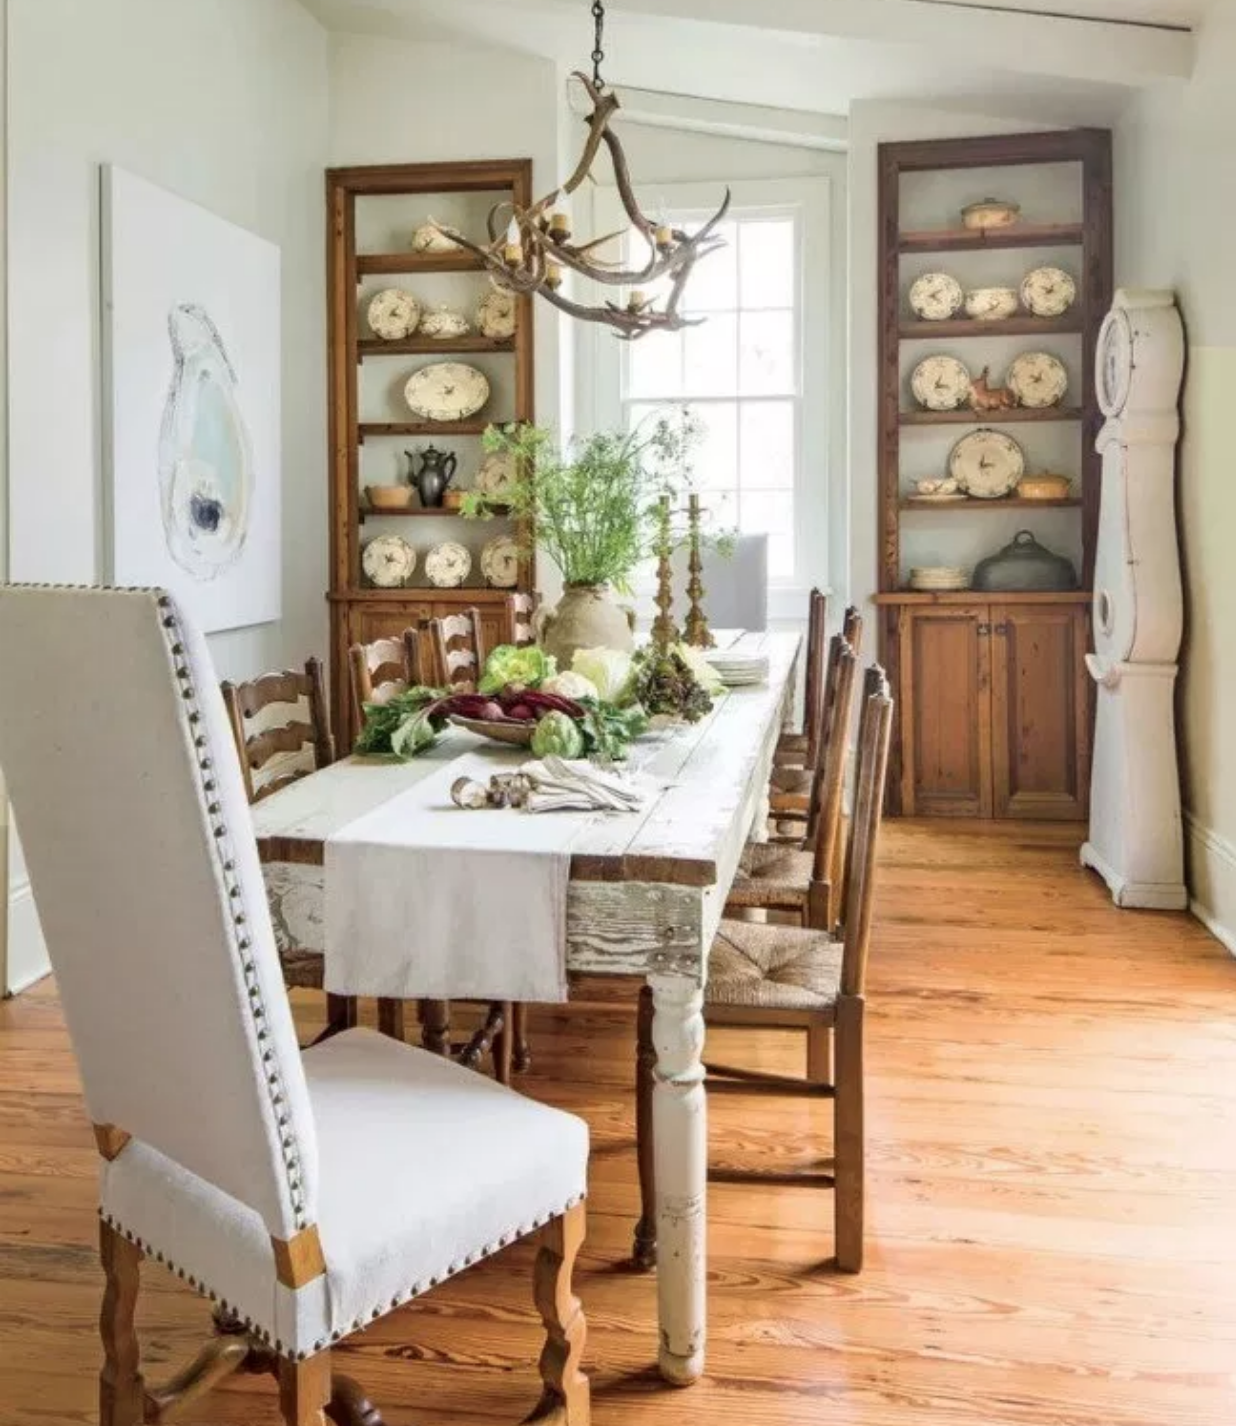 The 15 Most Beautiful Dining Rooms on Pinterest ...
